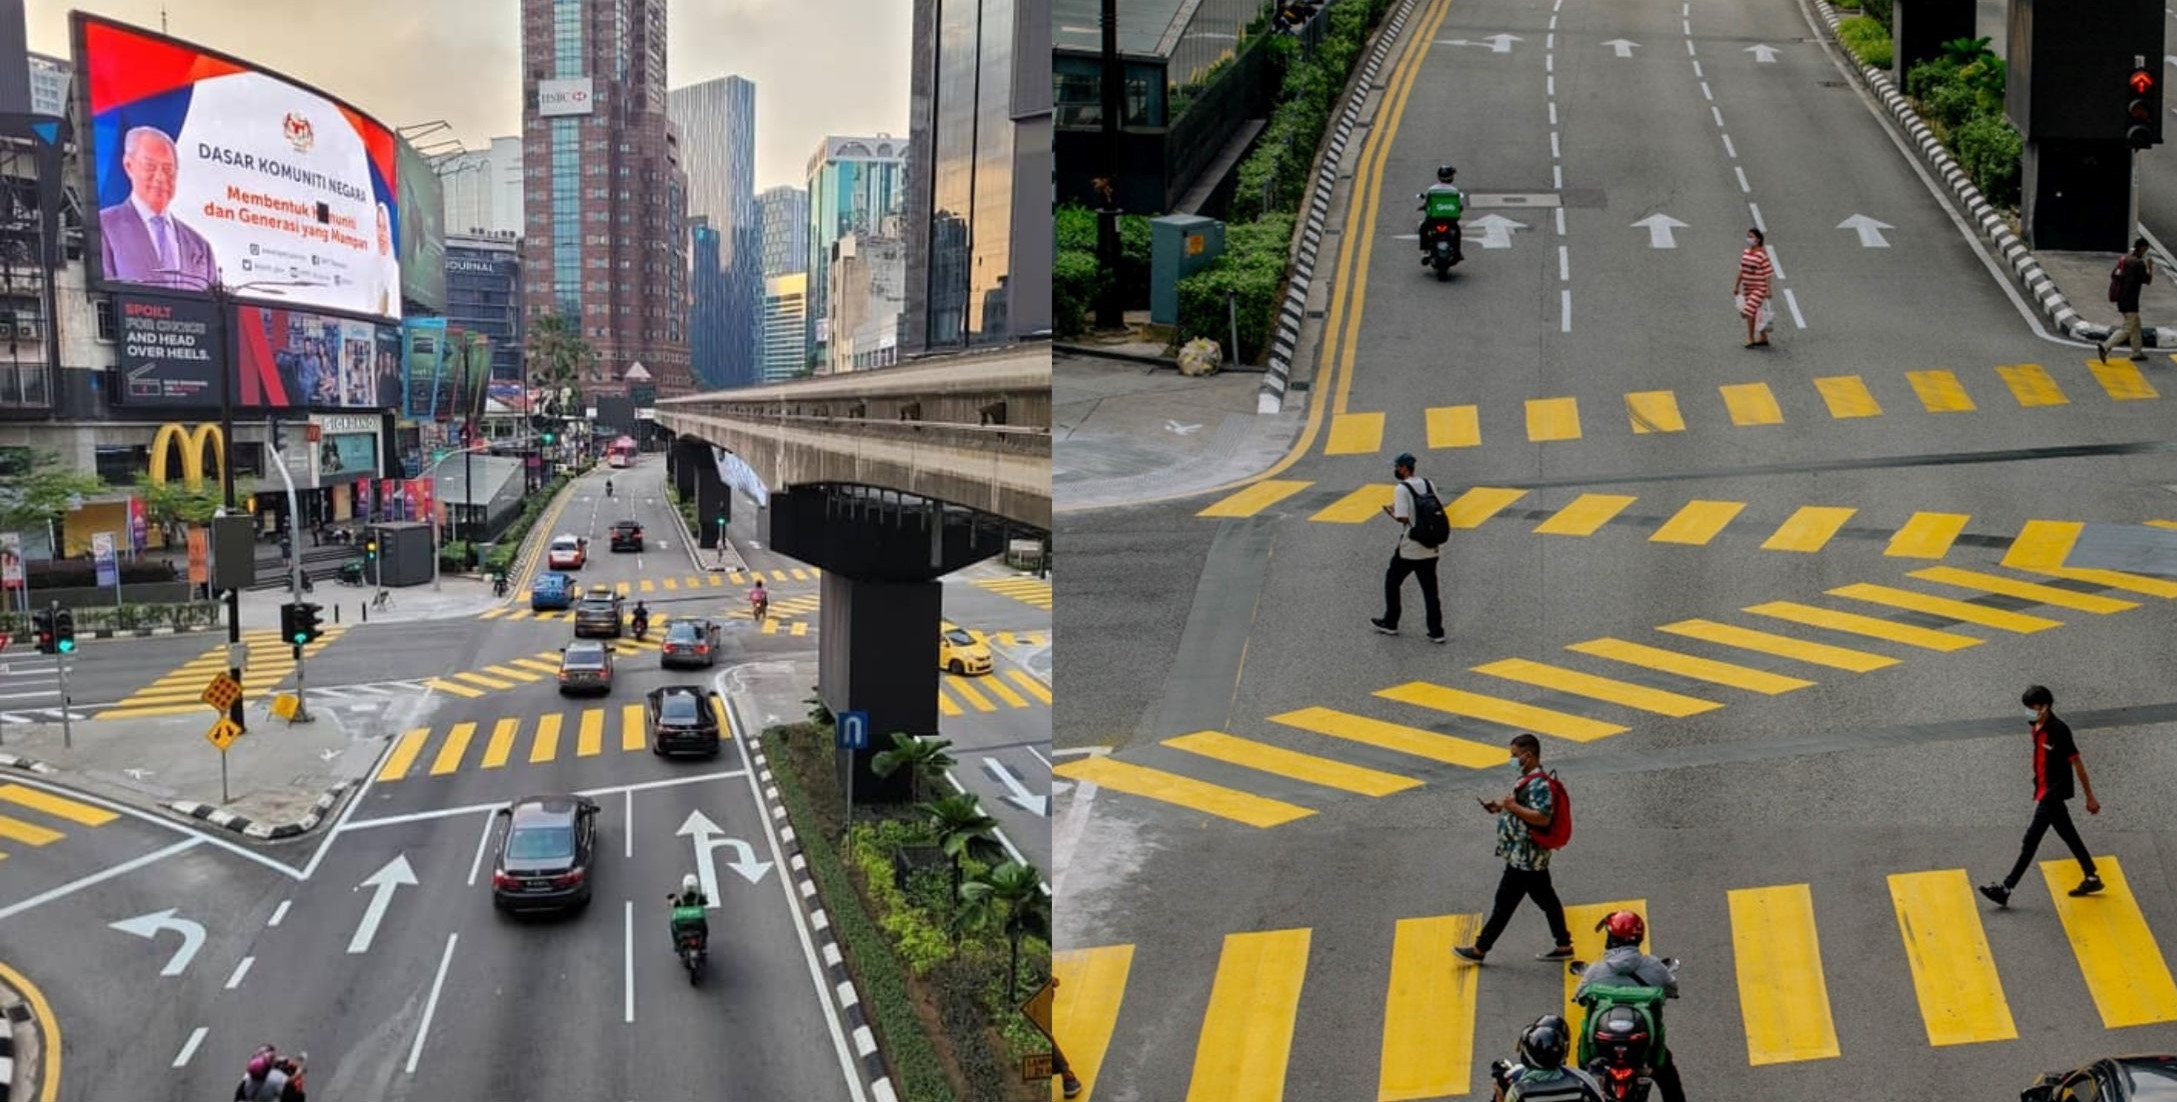 The pedestrian crossing was designed that way to provide more convenience to pedestrians. 